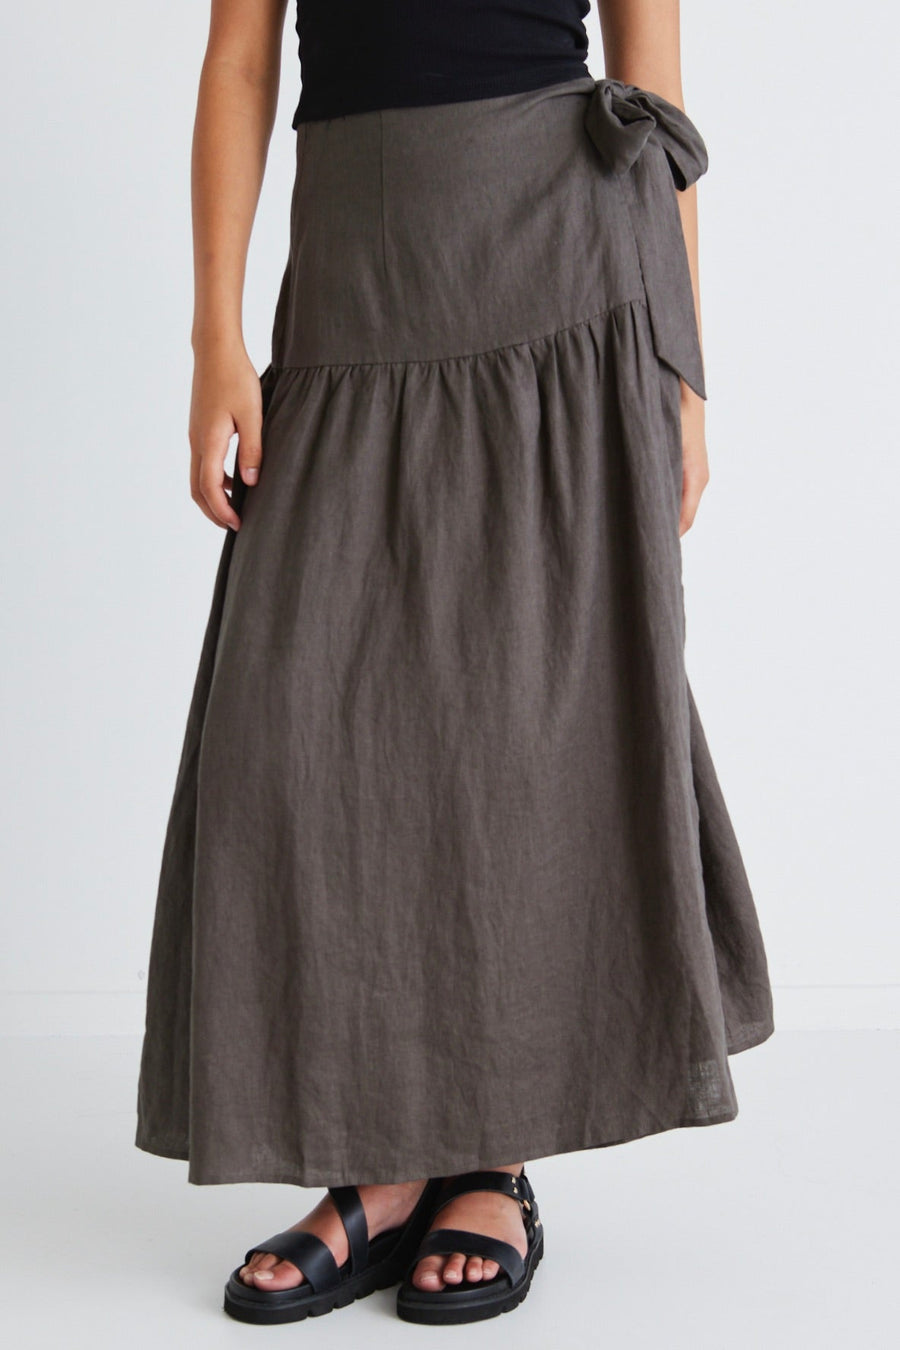 AMONG THE BRAVE IMPACT DARK OLIVE LINEN TIERED WRAP MAXI SKIRT - DARK OLIVE - WILDROSE